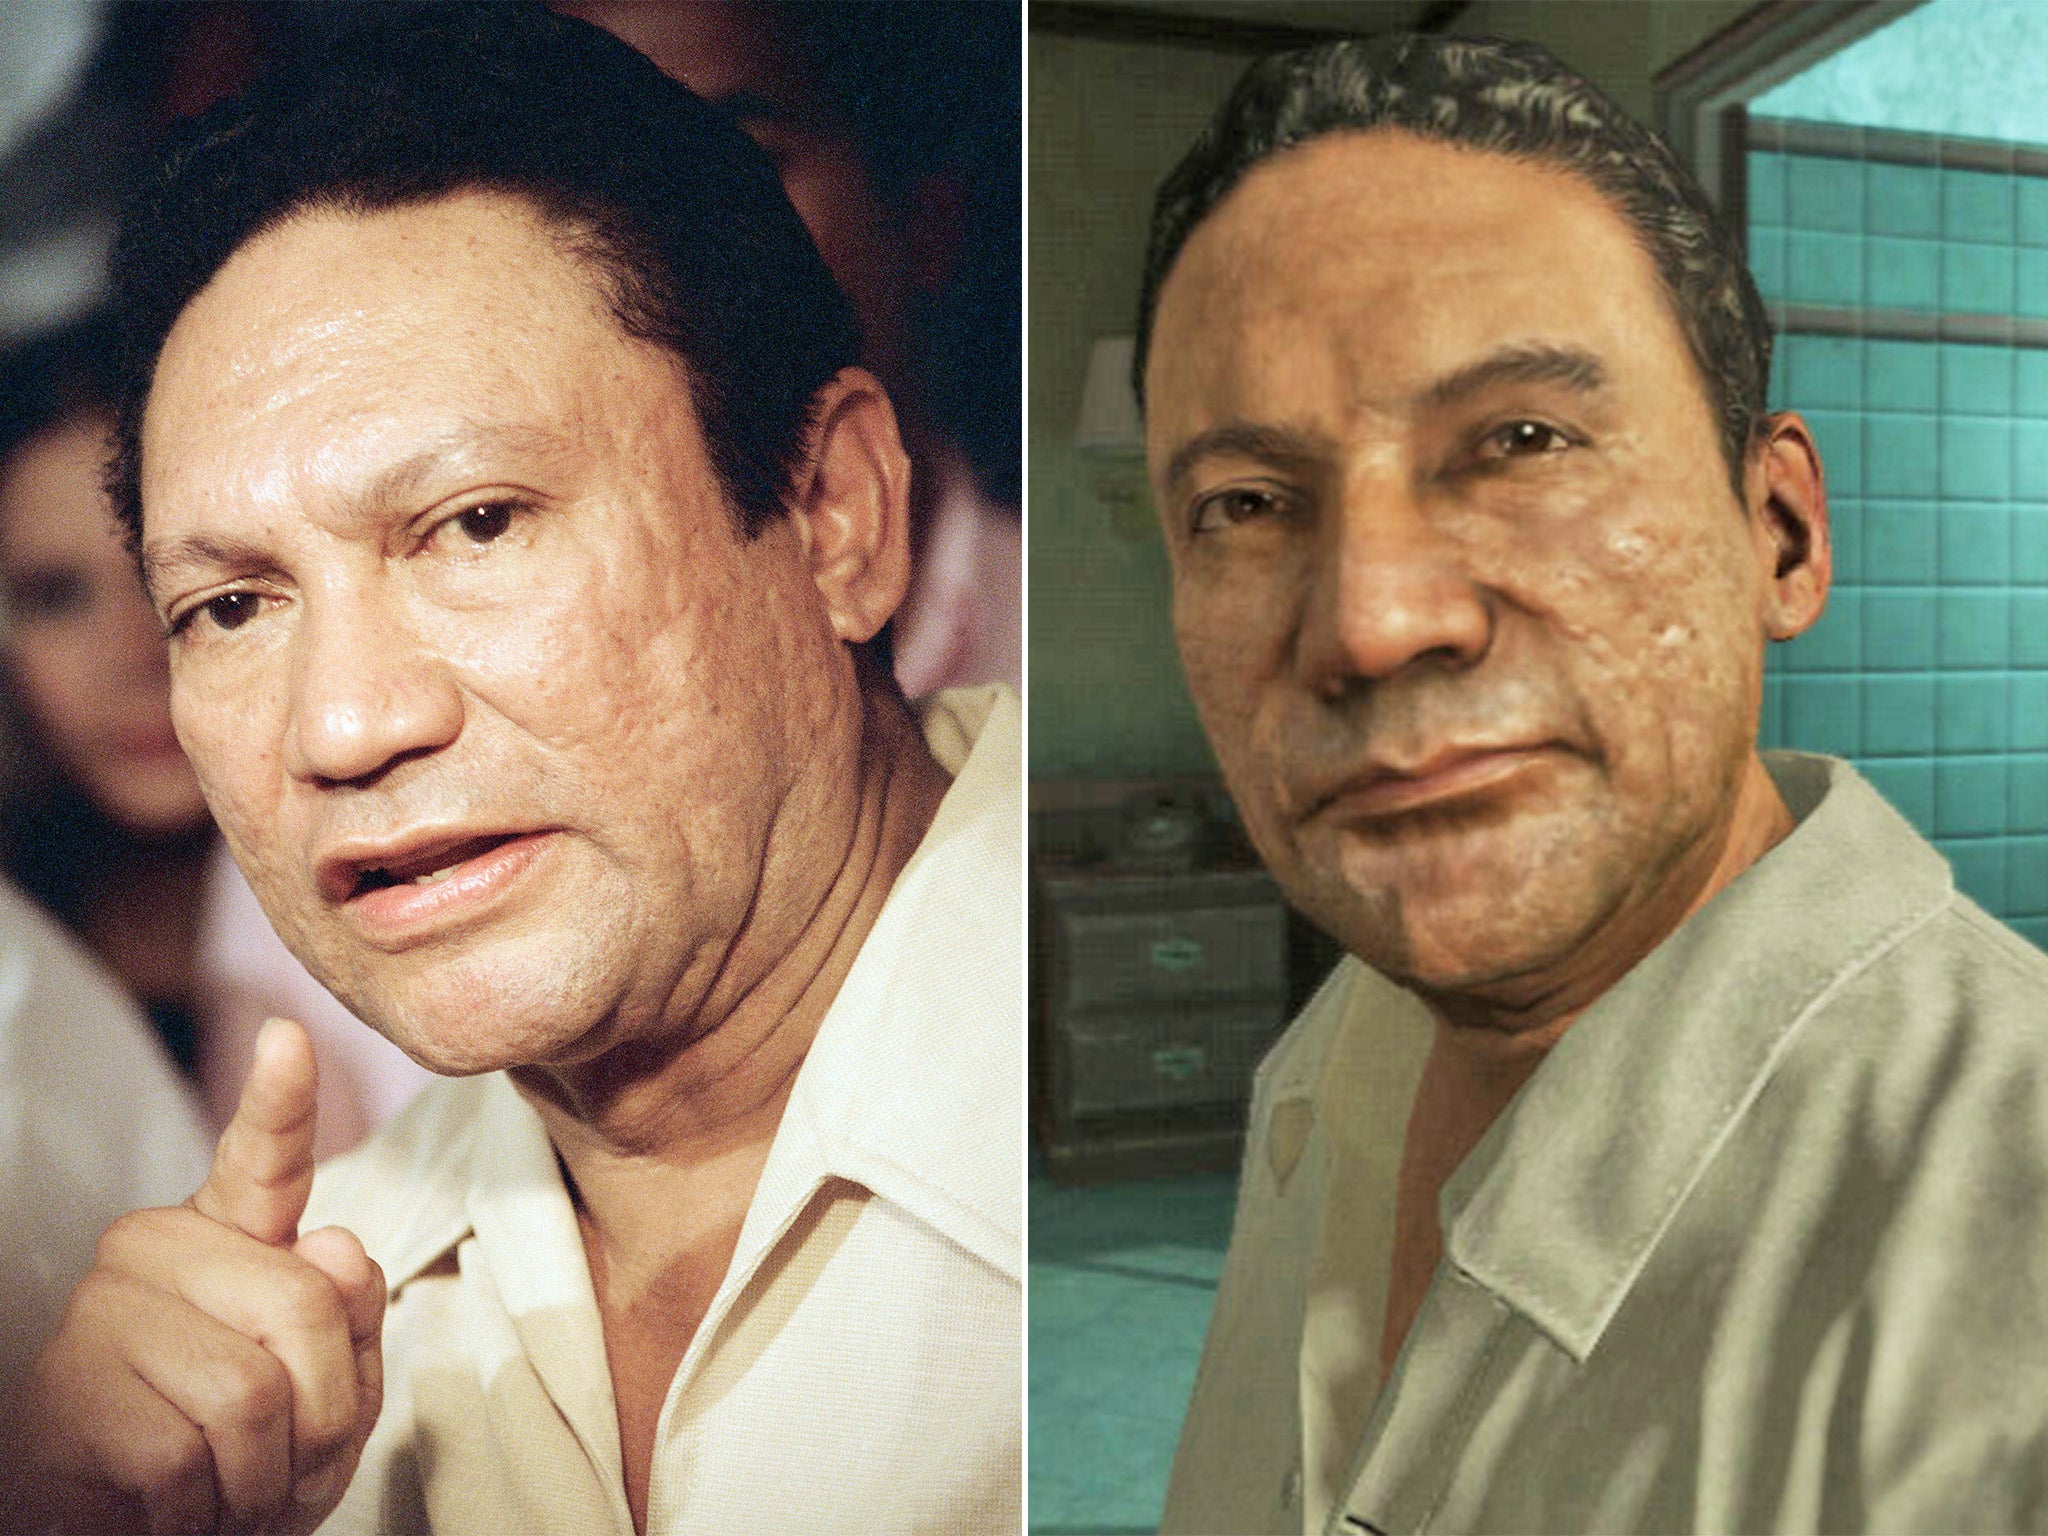 Manuel Noriega, left, and a character in 'Call of Duty: Black Ops II' that was based on the former Panamanian dictator